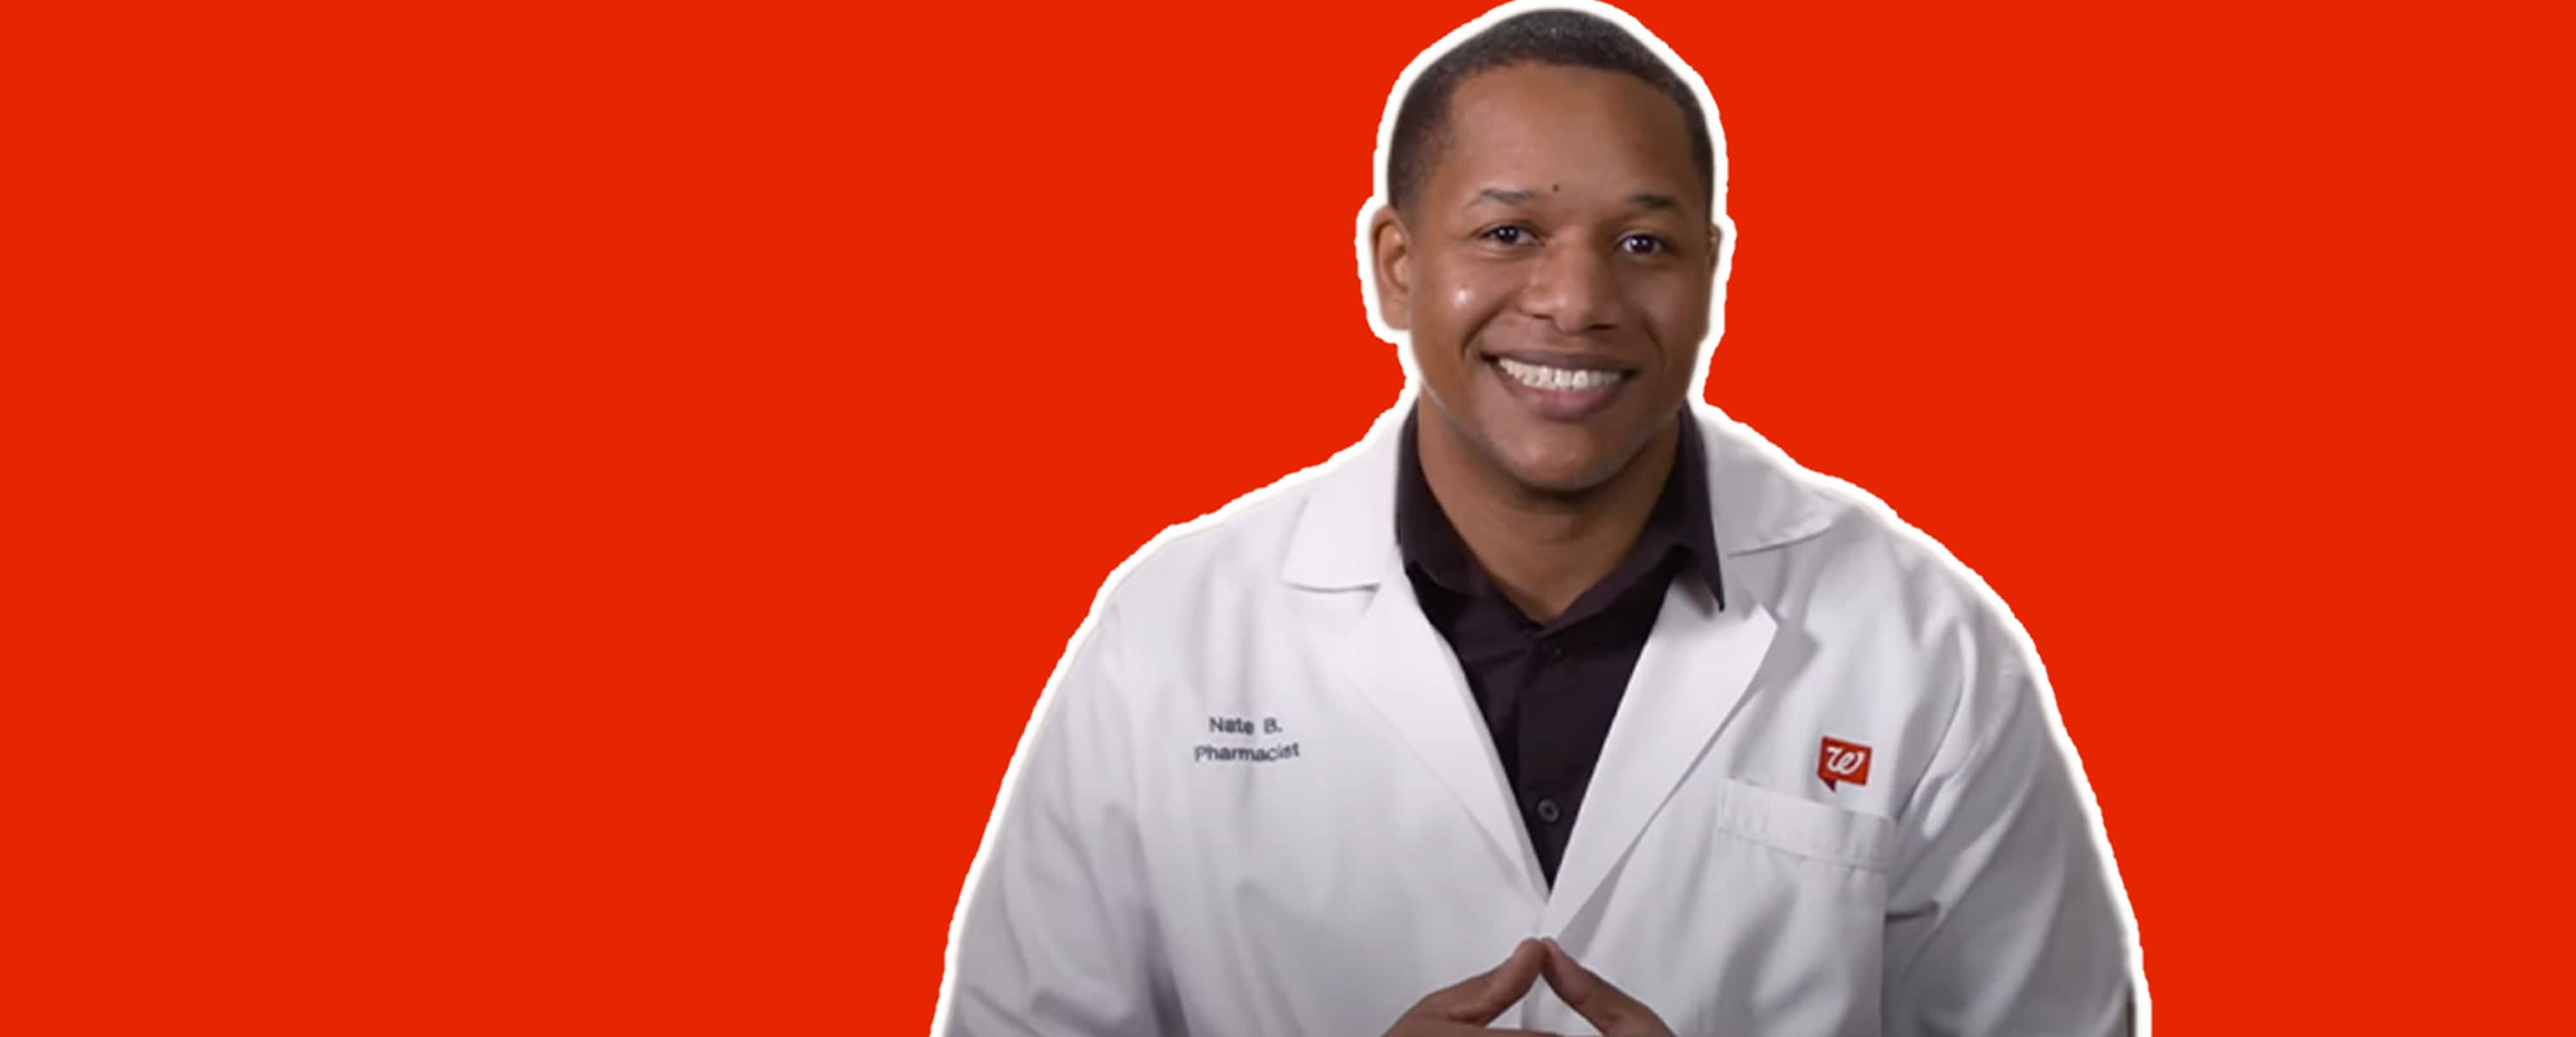 Pharmacist Nate on red background